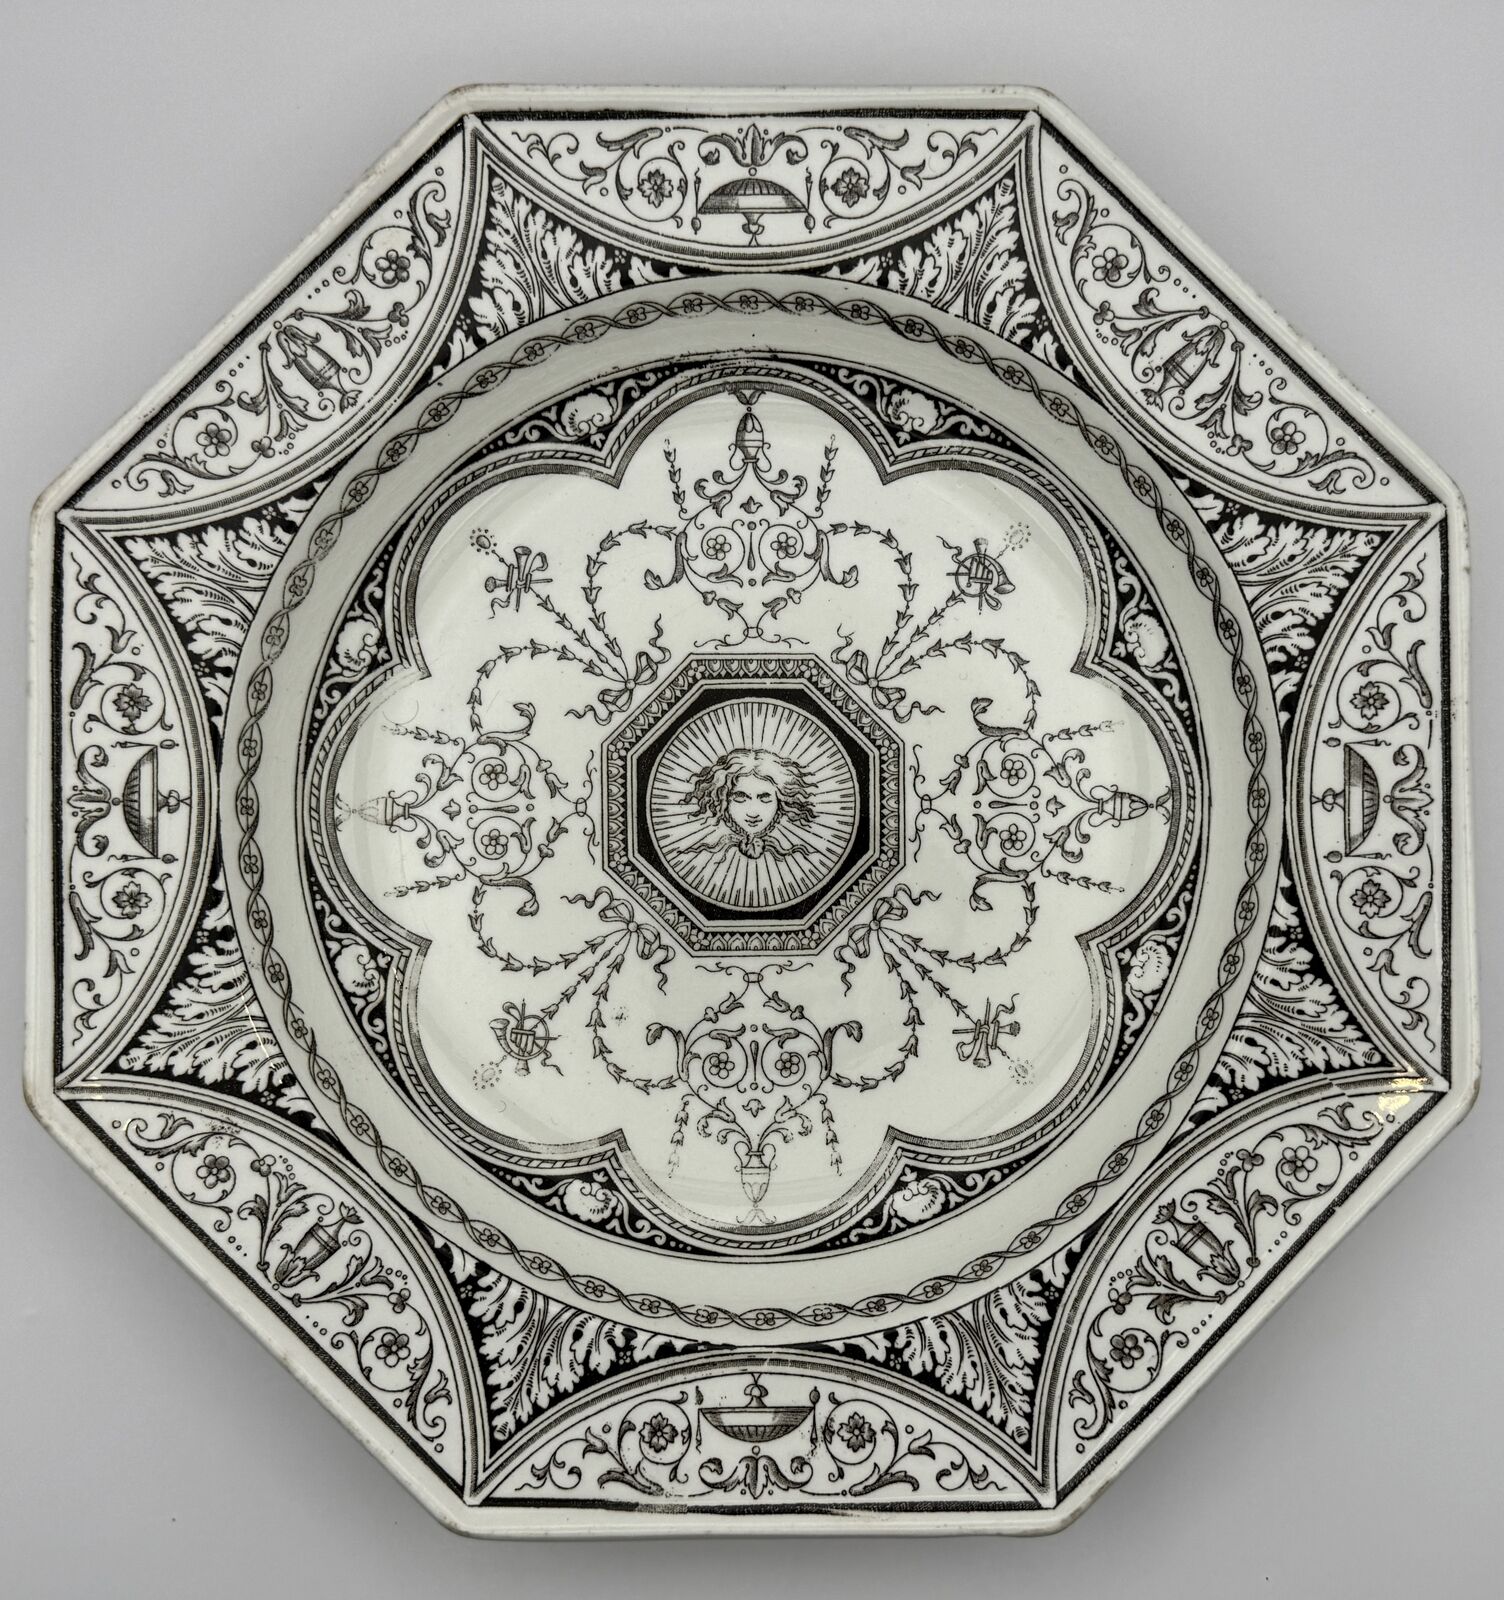 Minton's Antique Octagonal Plate - Refined Black and White Design